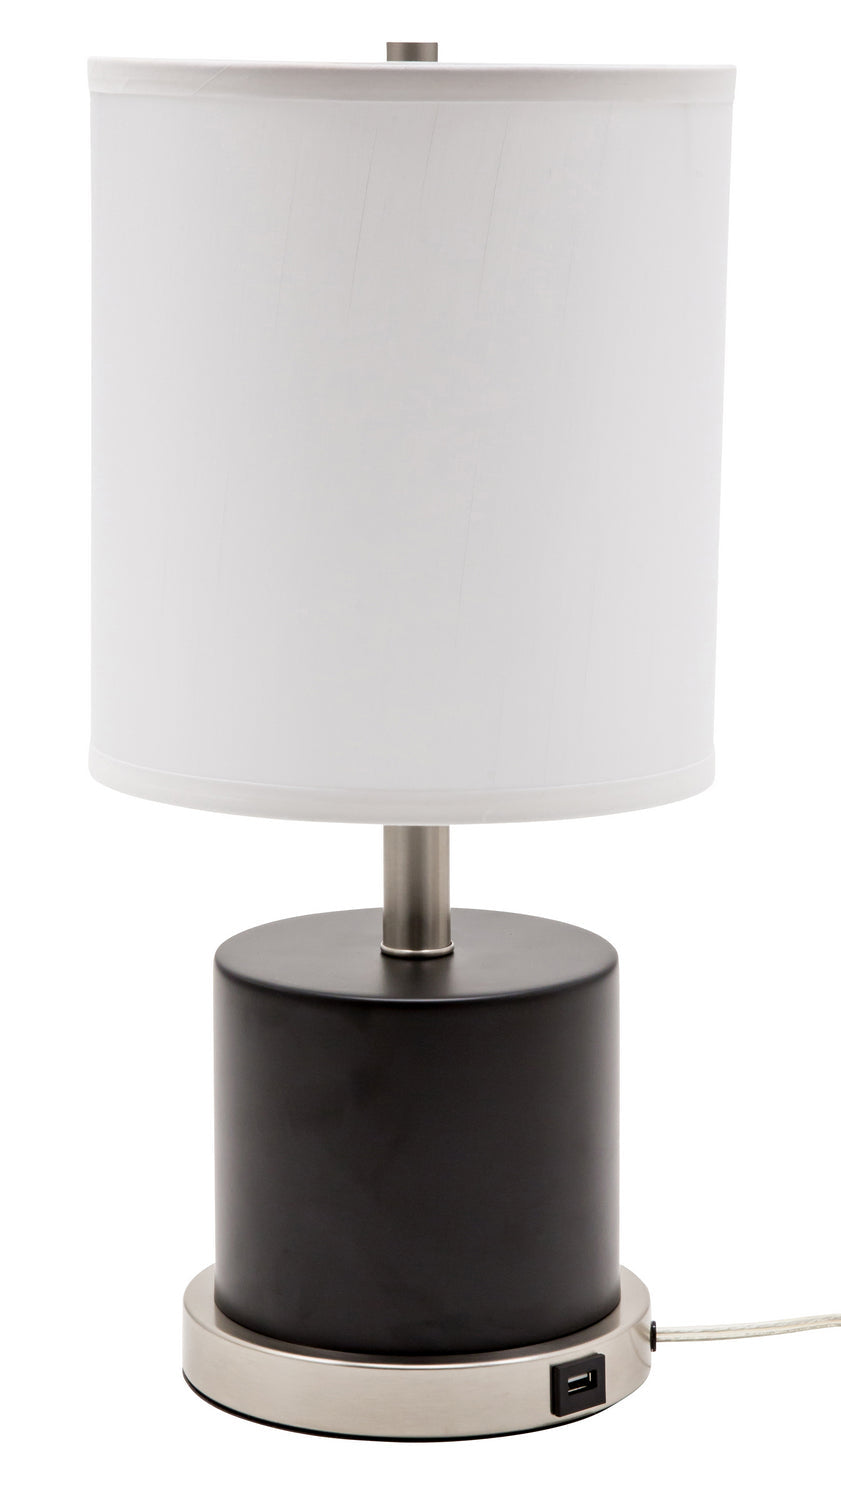 House of Troy - RU752-BLK - One Light Table Lamp - Rupert - Black With Satin Nickel Accents